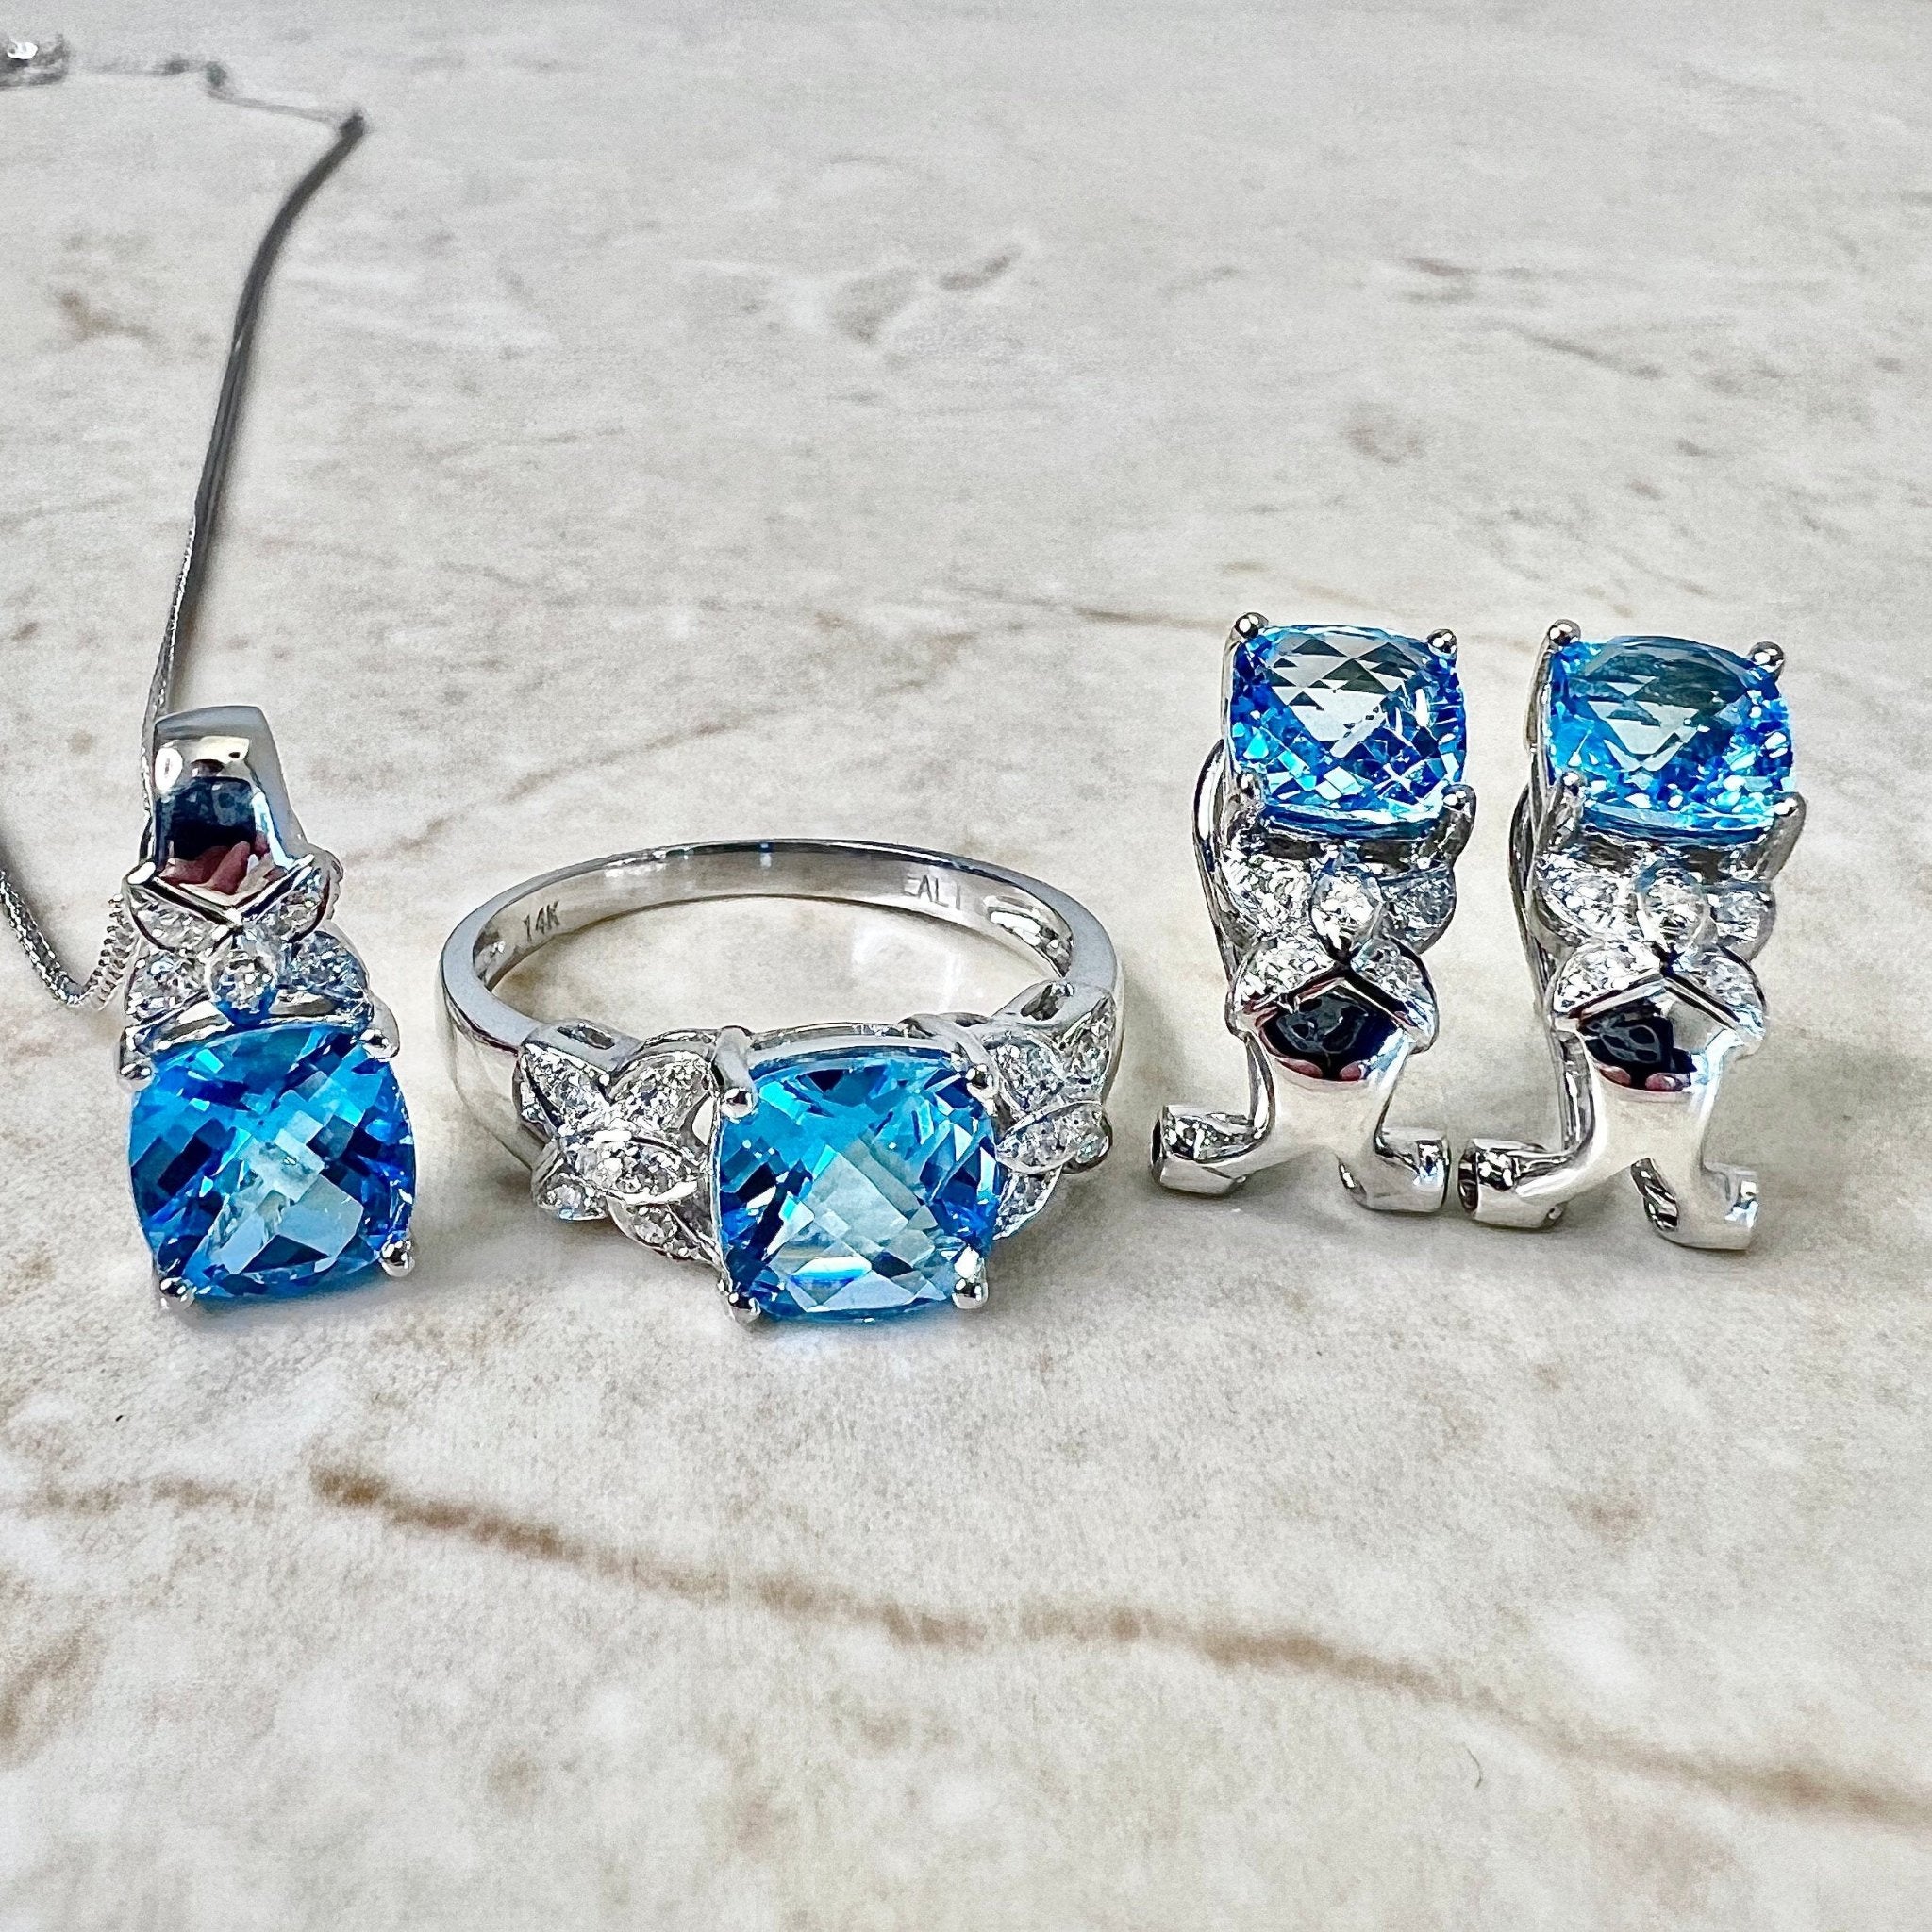 Blue Moissanite Earrings in 14k White gold and Round Blue Moissanite  Solitaire Pendant in solid white gold - perfect bridal jewelry set